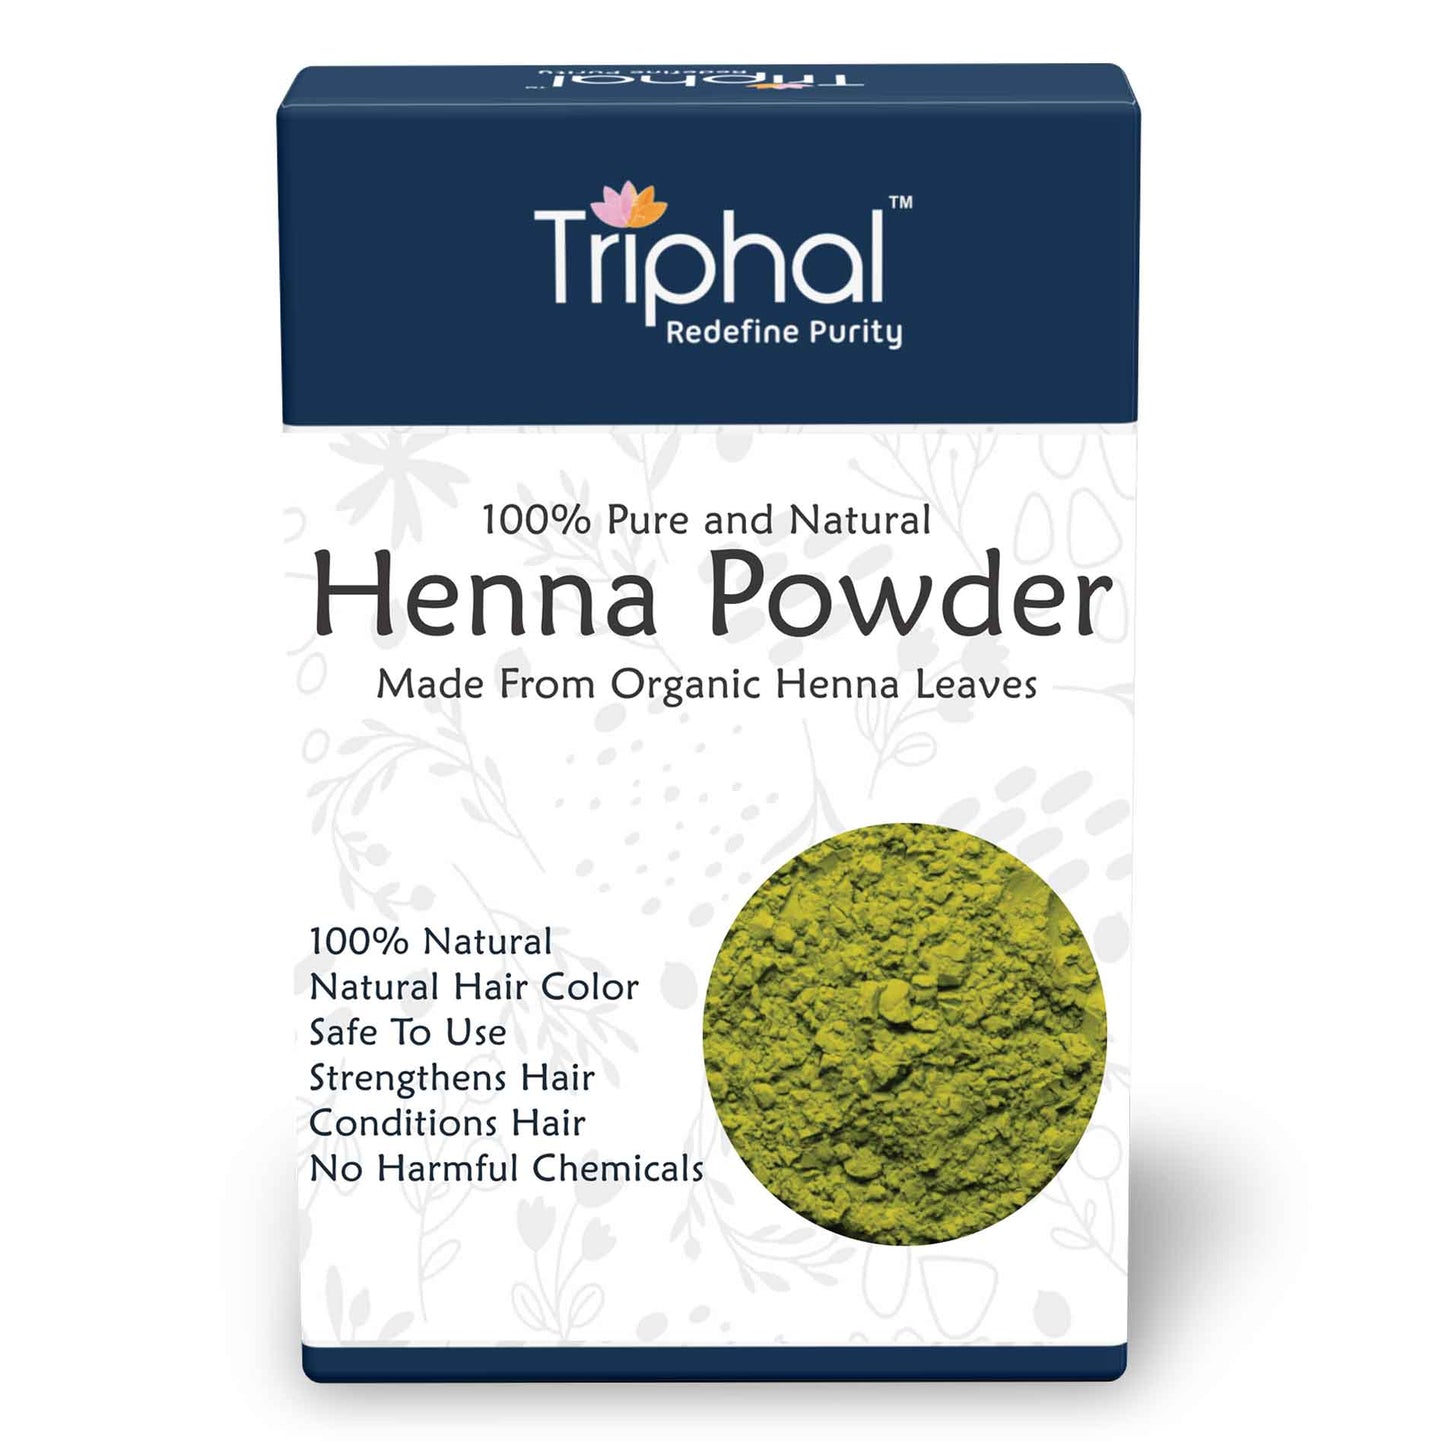 Henna Powder For Natural Hair Color by brand Triphal